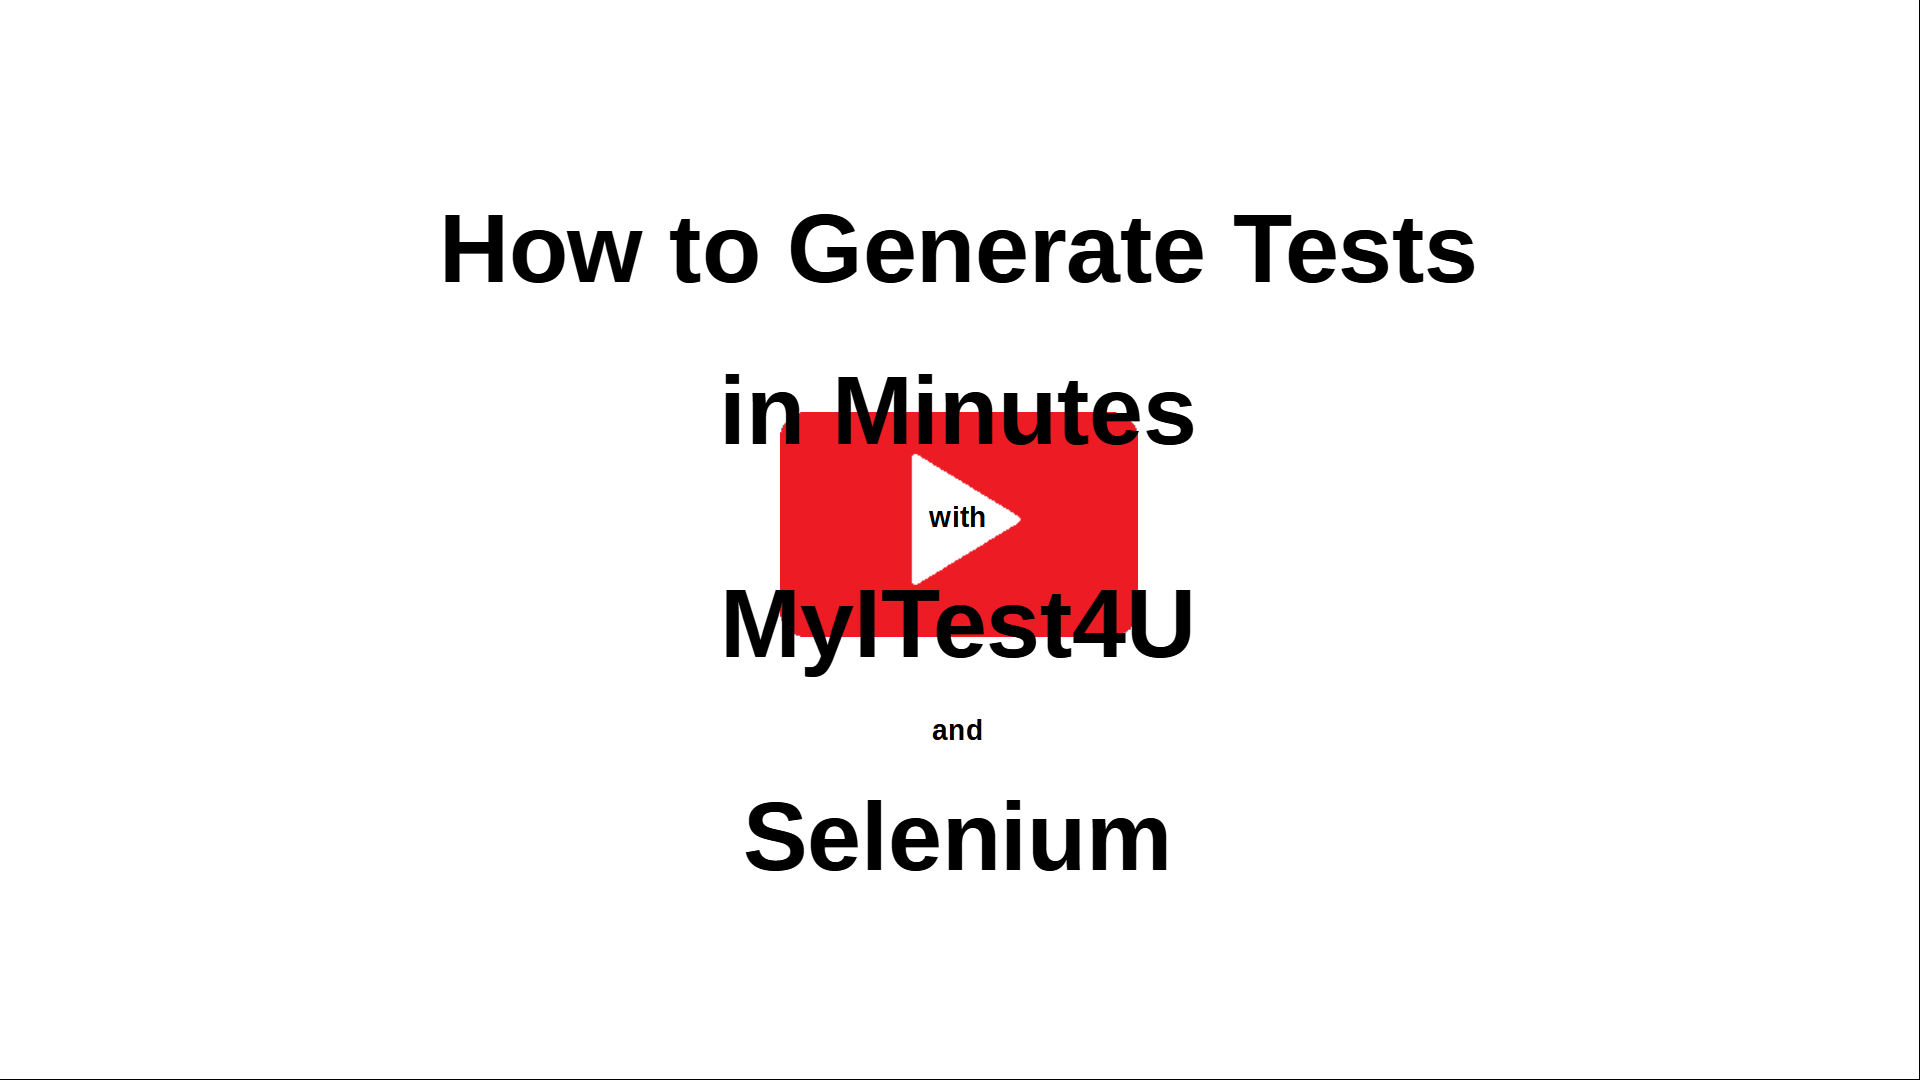 How to Generate Tests for Your Application in Minutes with MyITest4U and Selenium